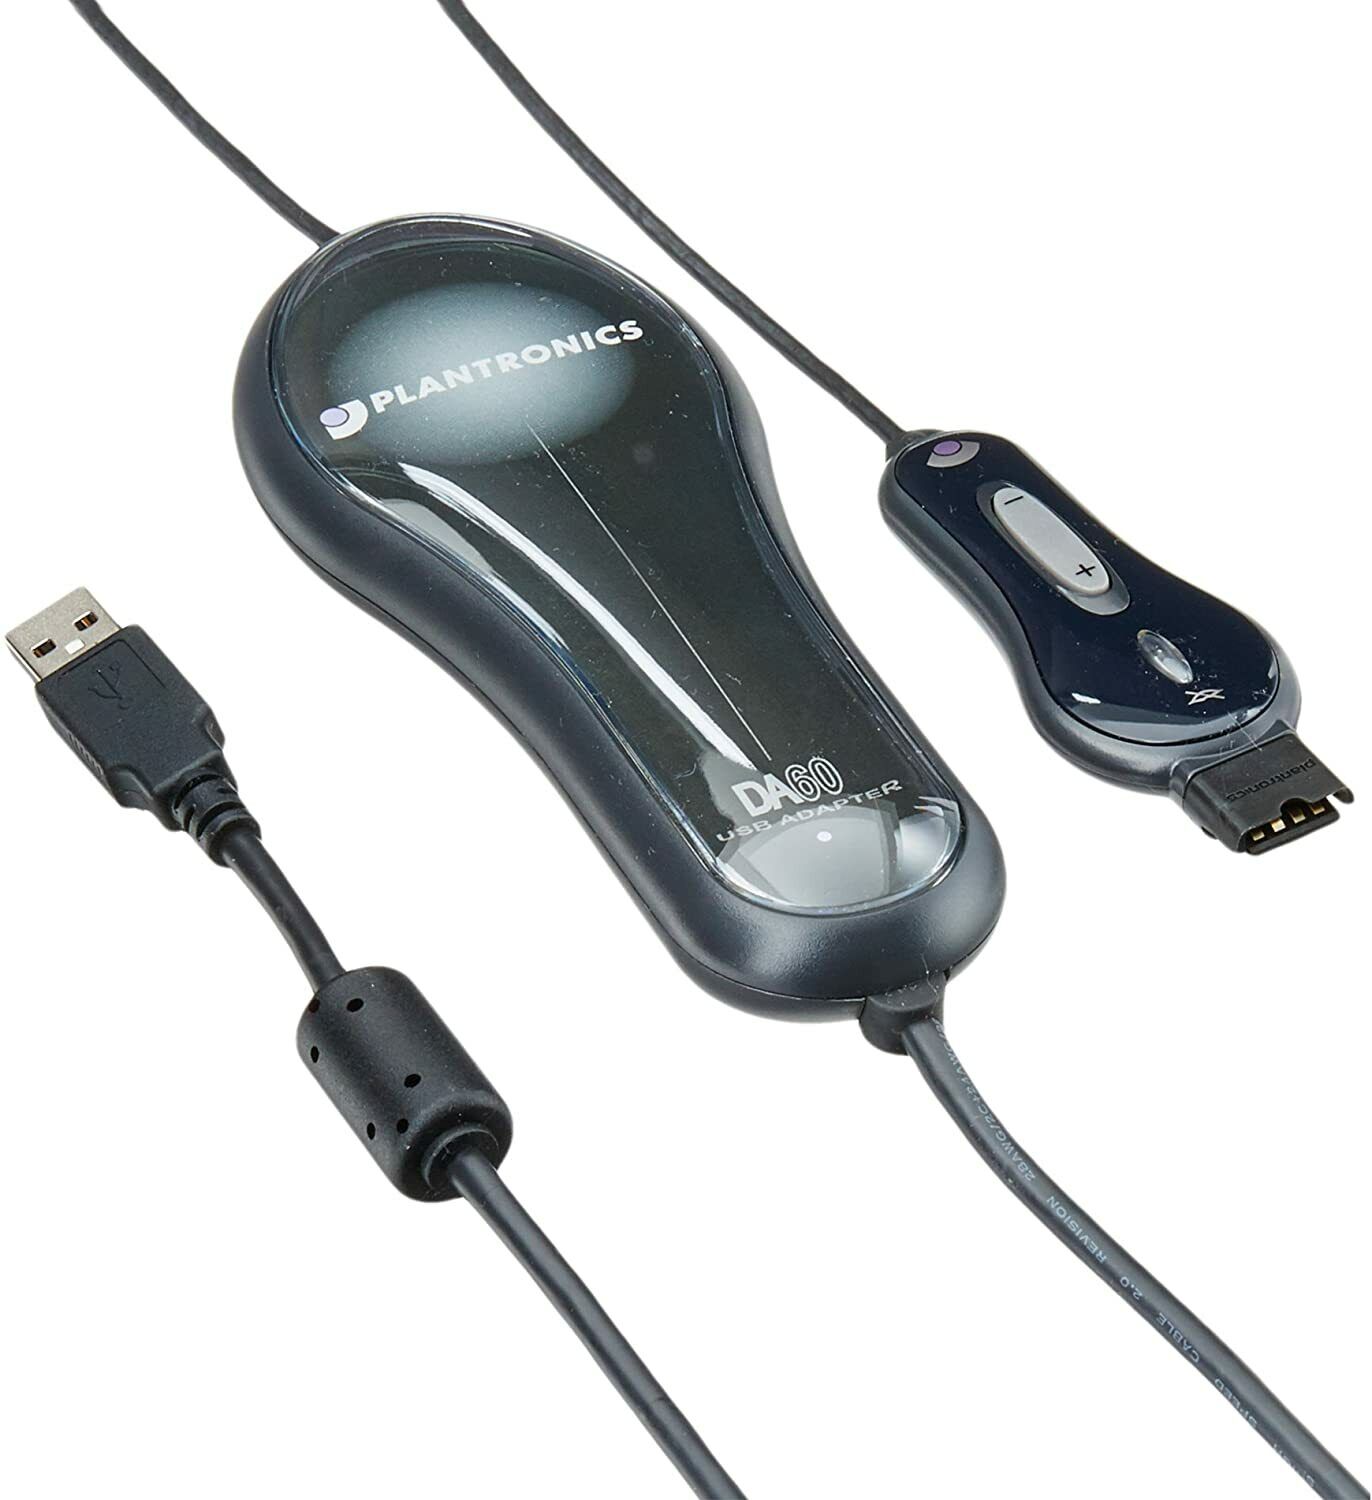 Plantronics USB to Quick Disconnect Adapter fits H HW-series Headset to PC, DA60